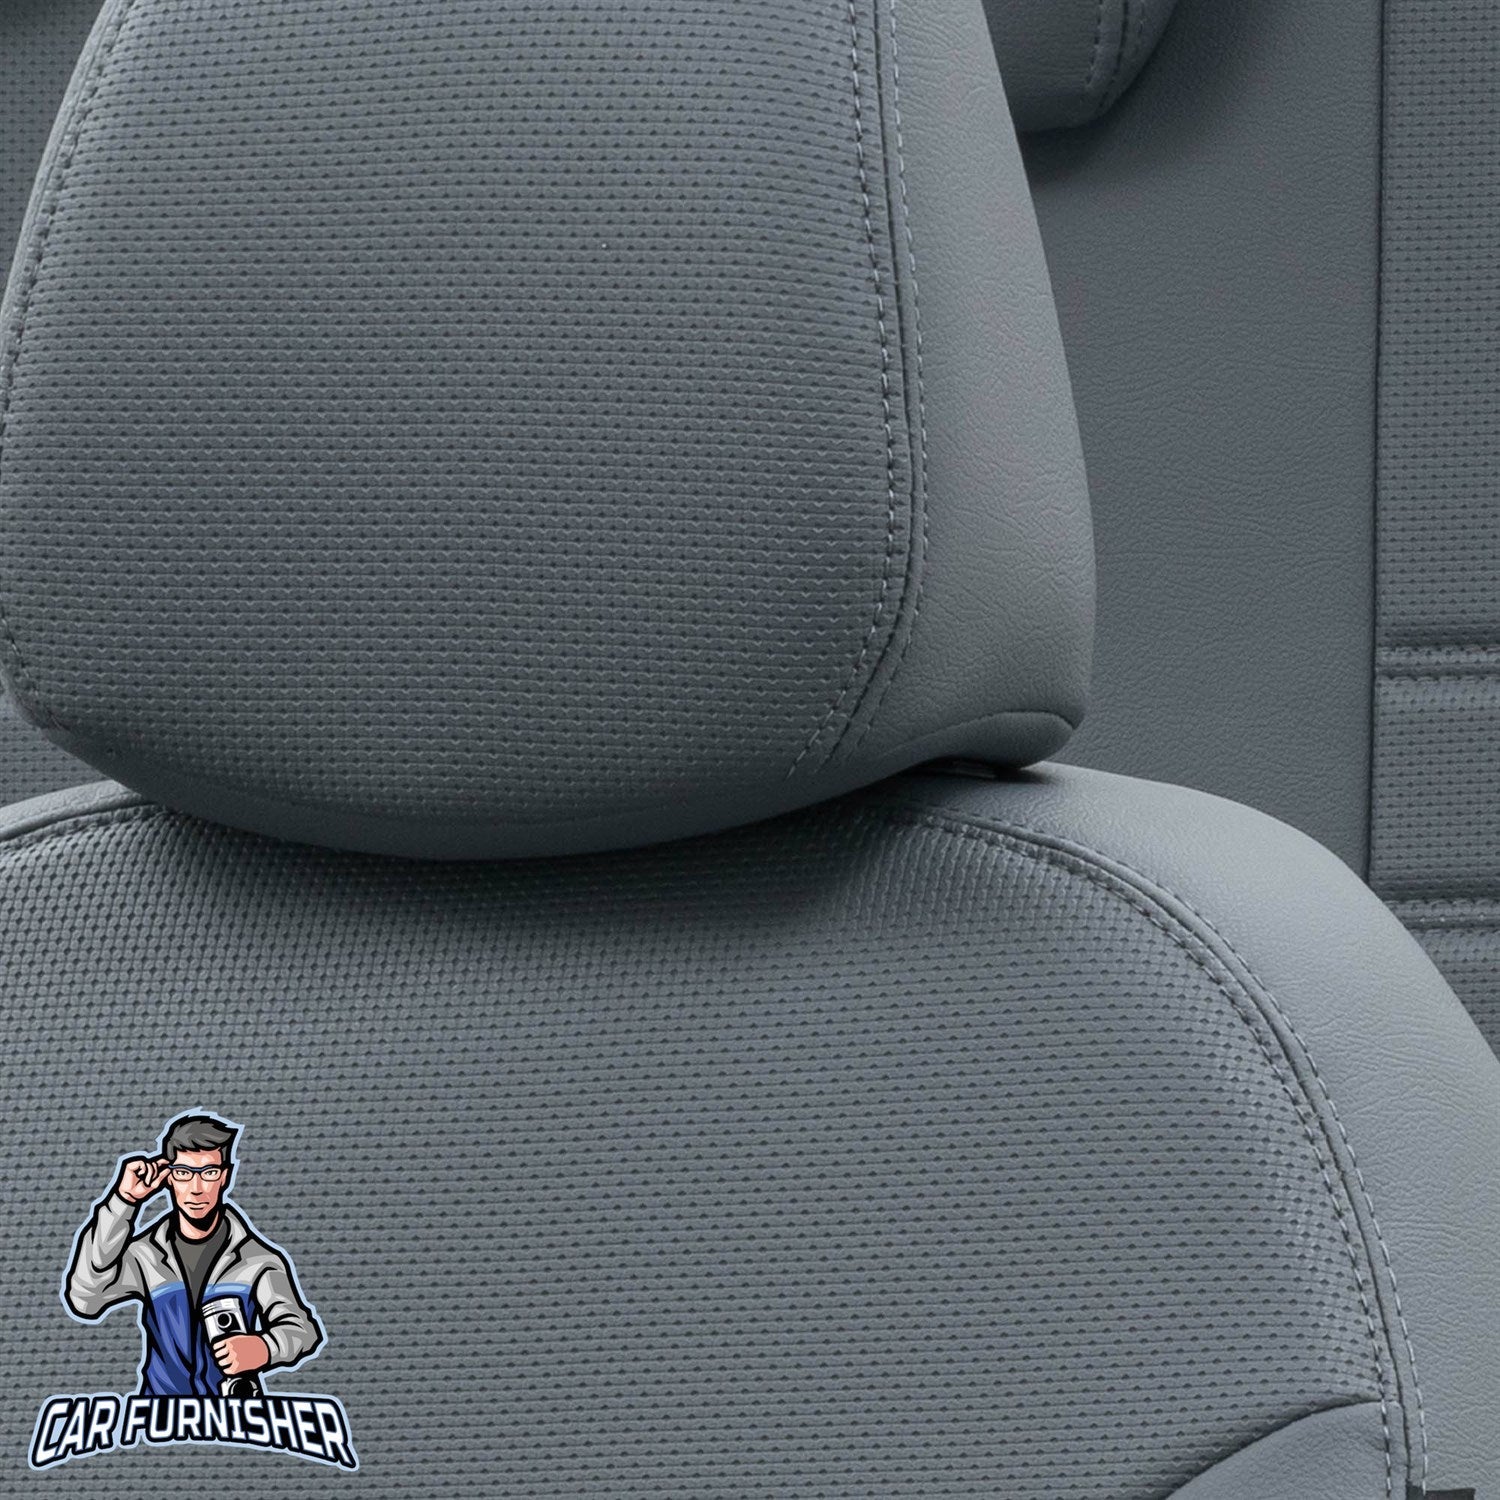 Volvo S60 Car Seat Cover 2000-2018 T4/T5/T6/T8/D5 New York Design Smoked Full Set (5 Seats + Handrest) Leather & Fabric